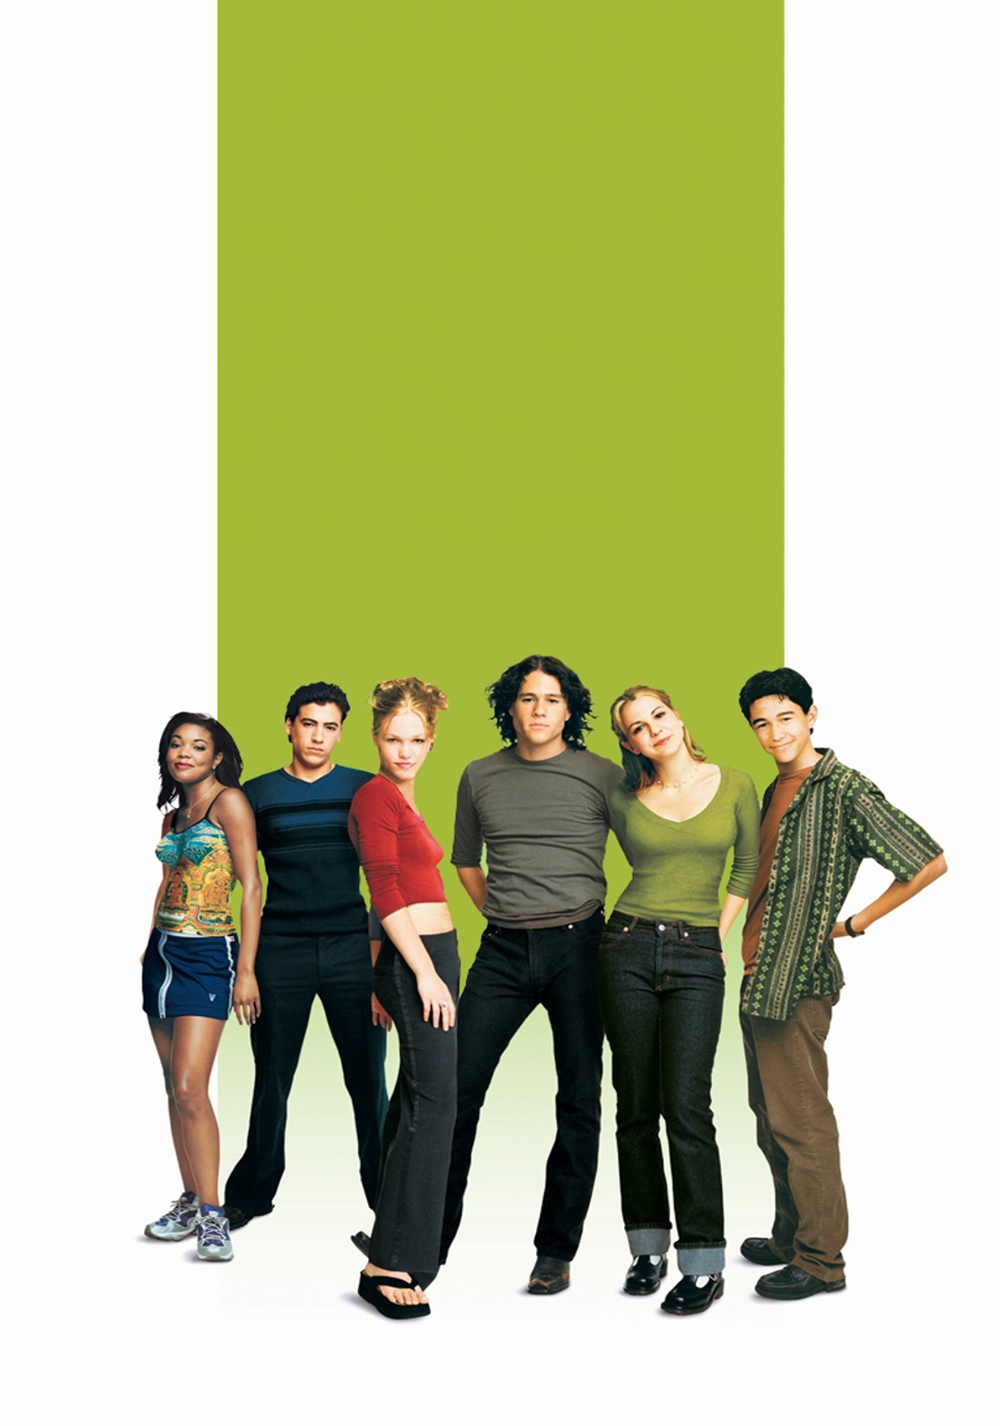 10 Things I Hate About You Picture.